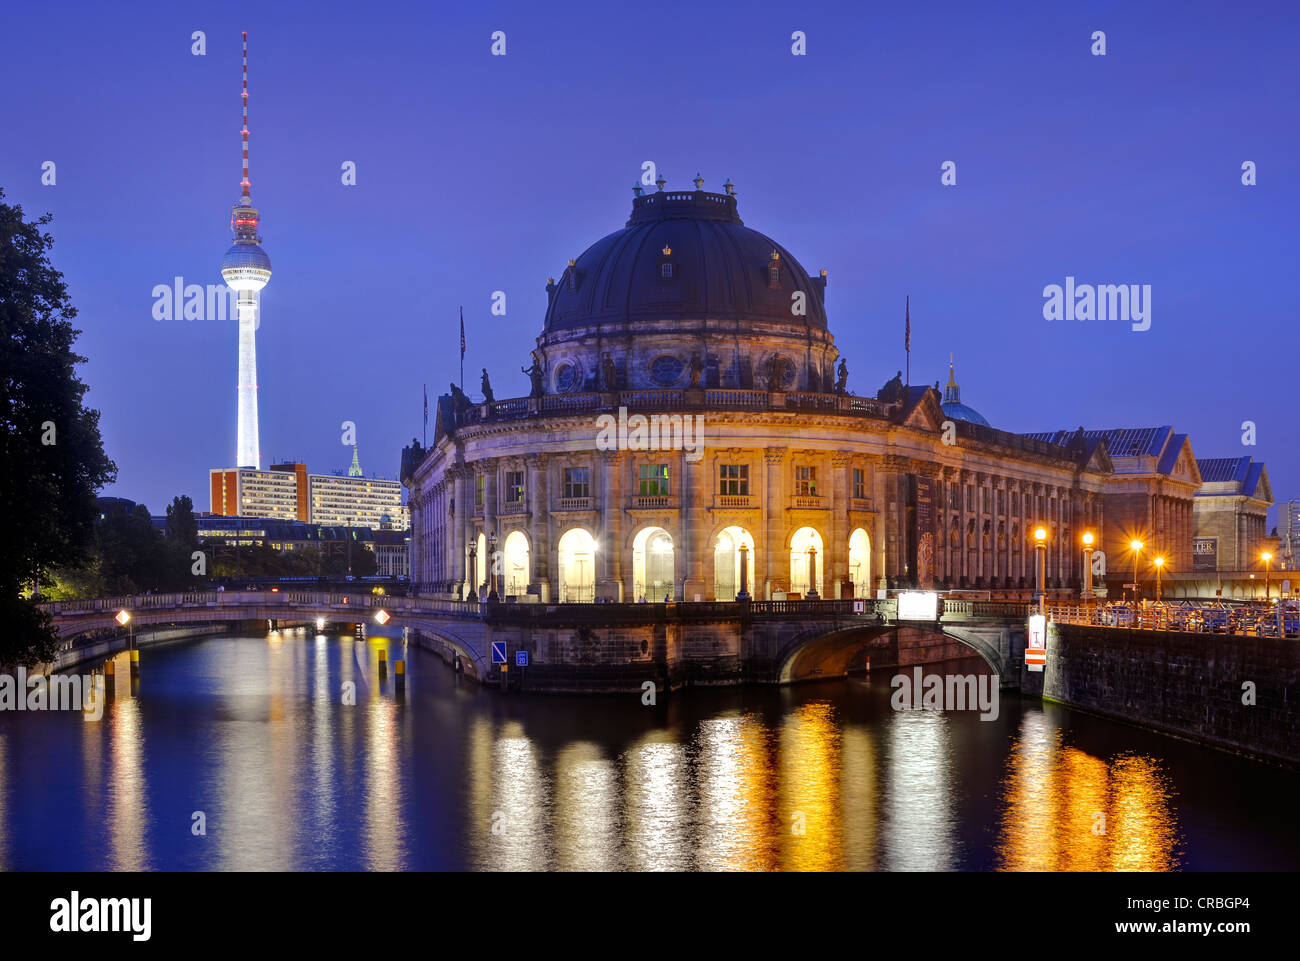 Night view at the blue hour, Bode-Museum, TV tower, Museumsinsel island, UNESCO World Heritage Site, Mitte district, Berlin Stock Photo